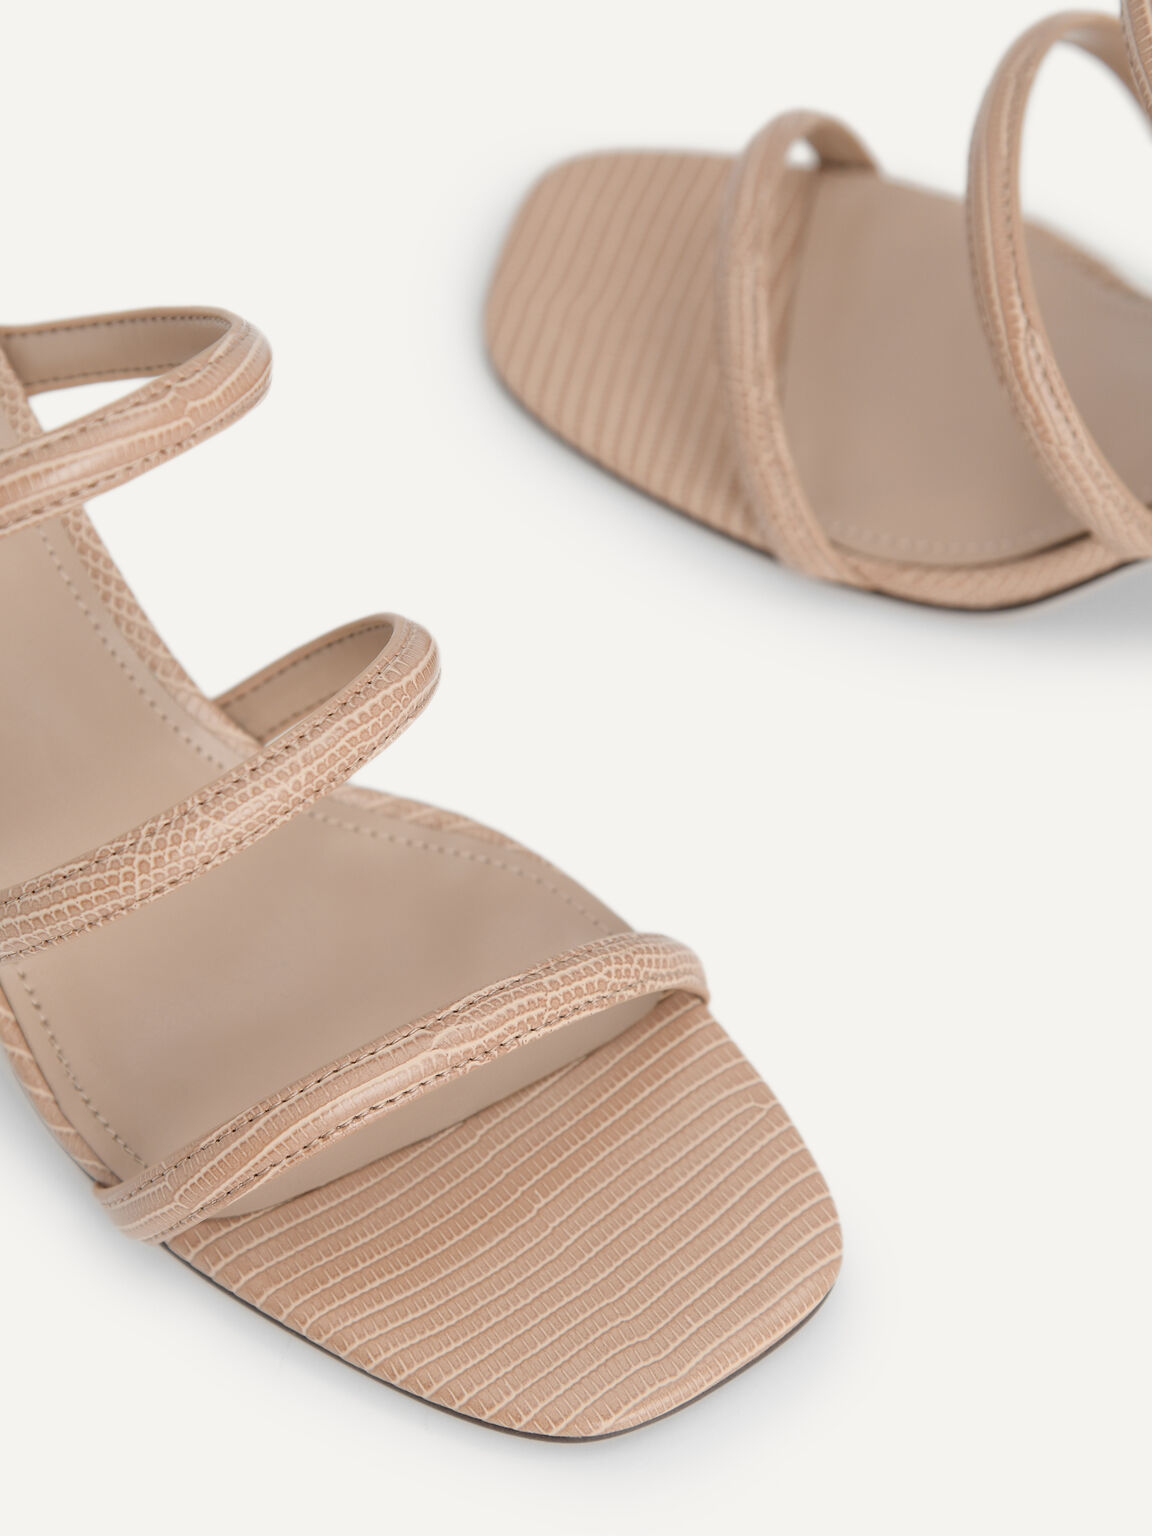 Strappy Heel Lizard-Effect Sandals, Taupe